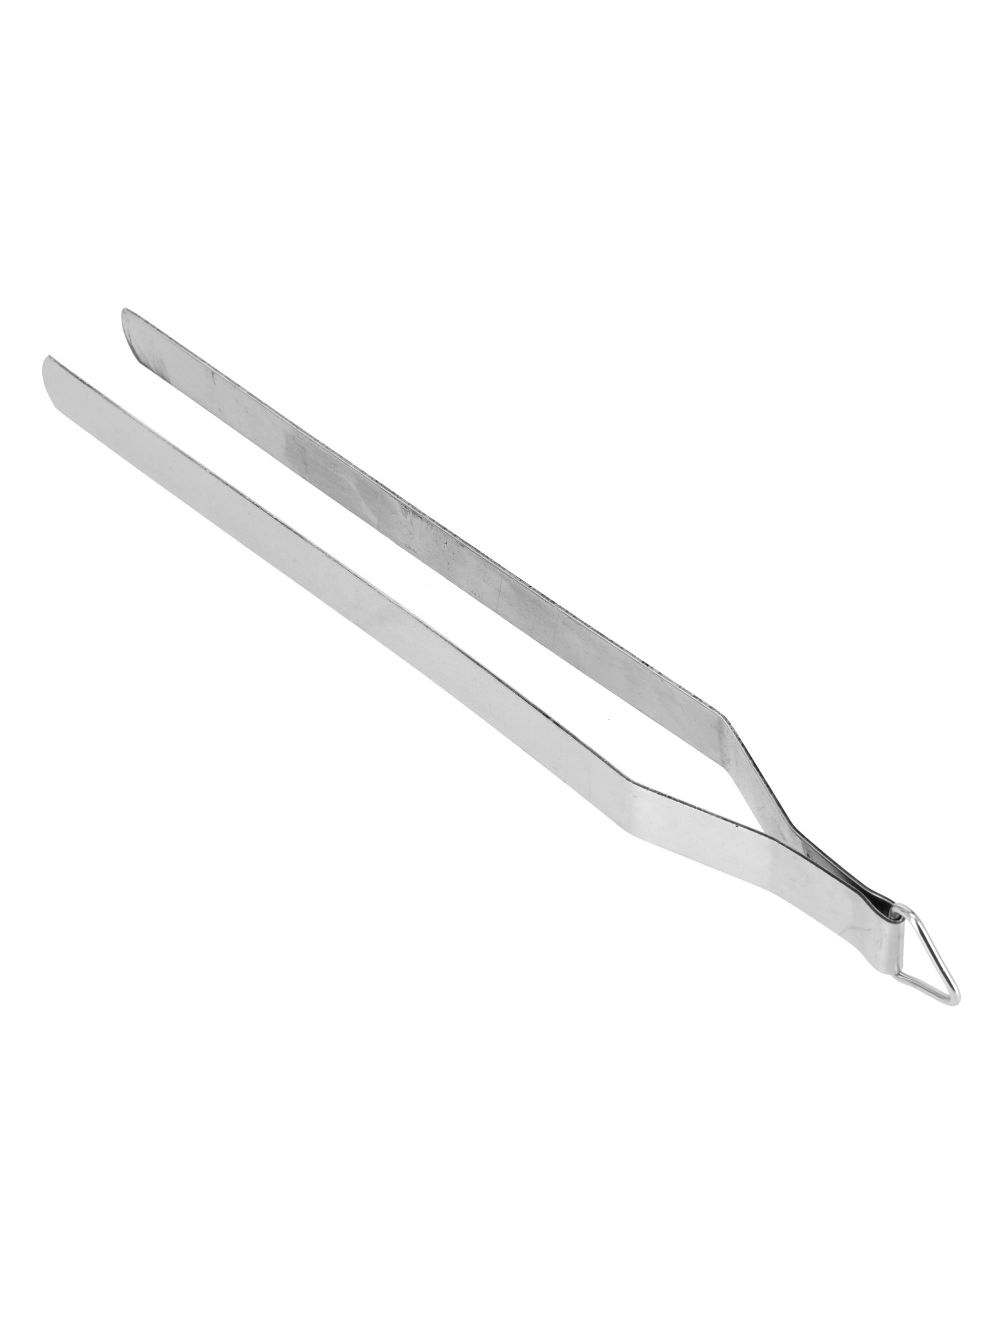 Delcasa DC1518 31Cm Stainless Steel Tongs